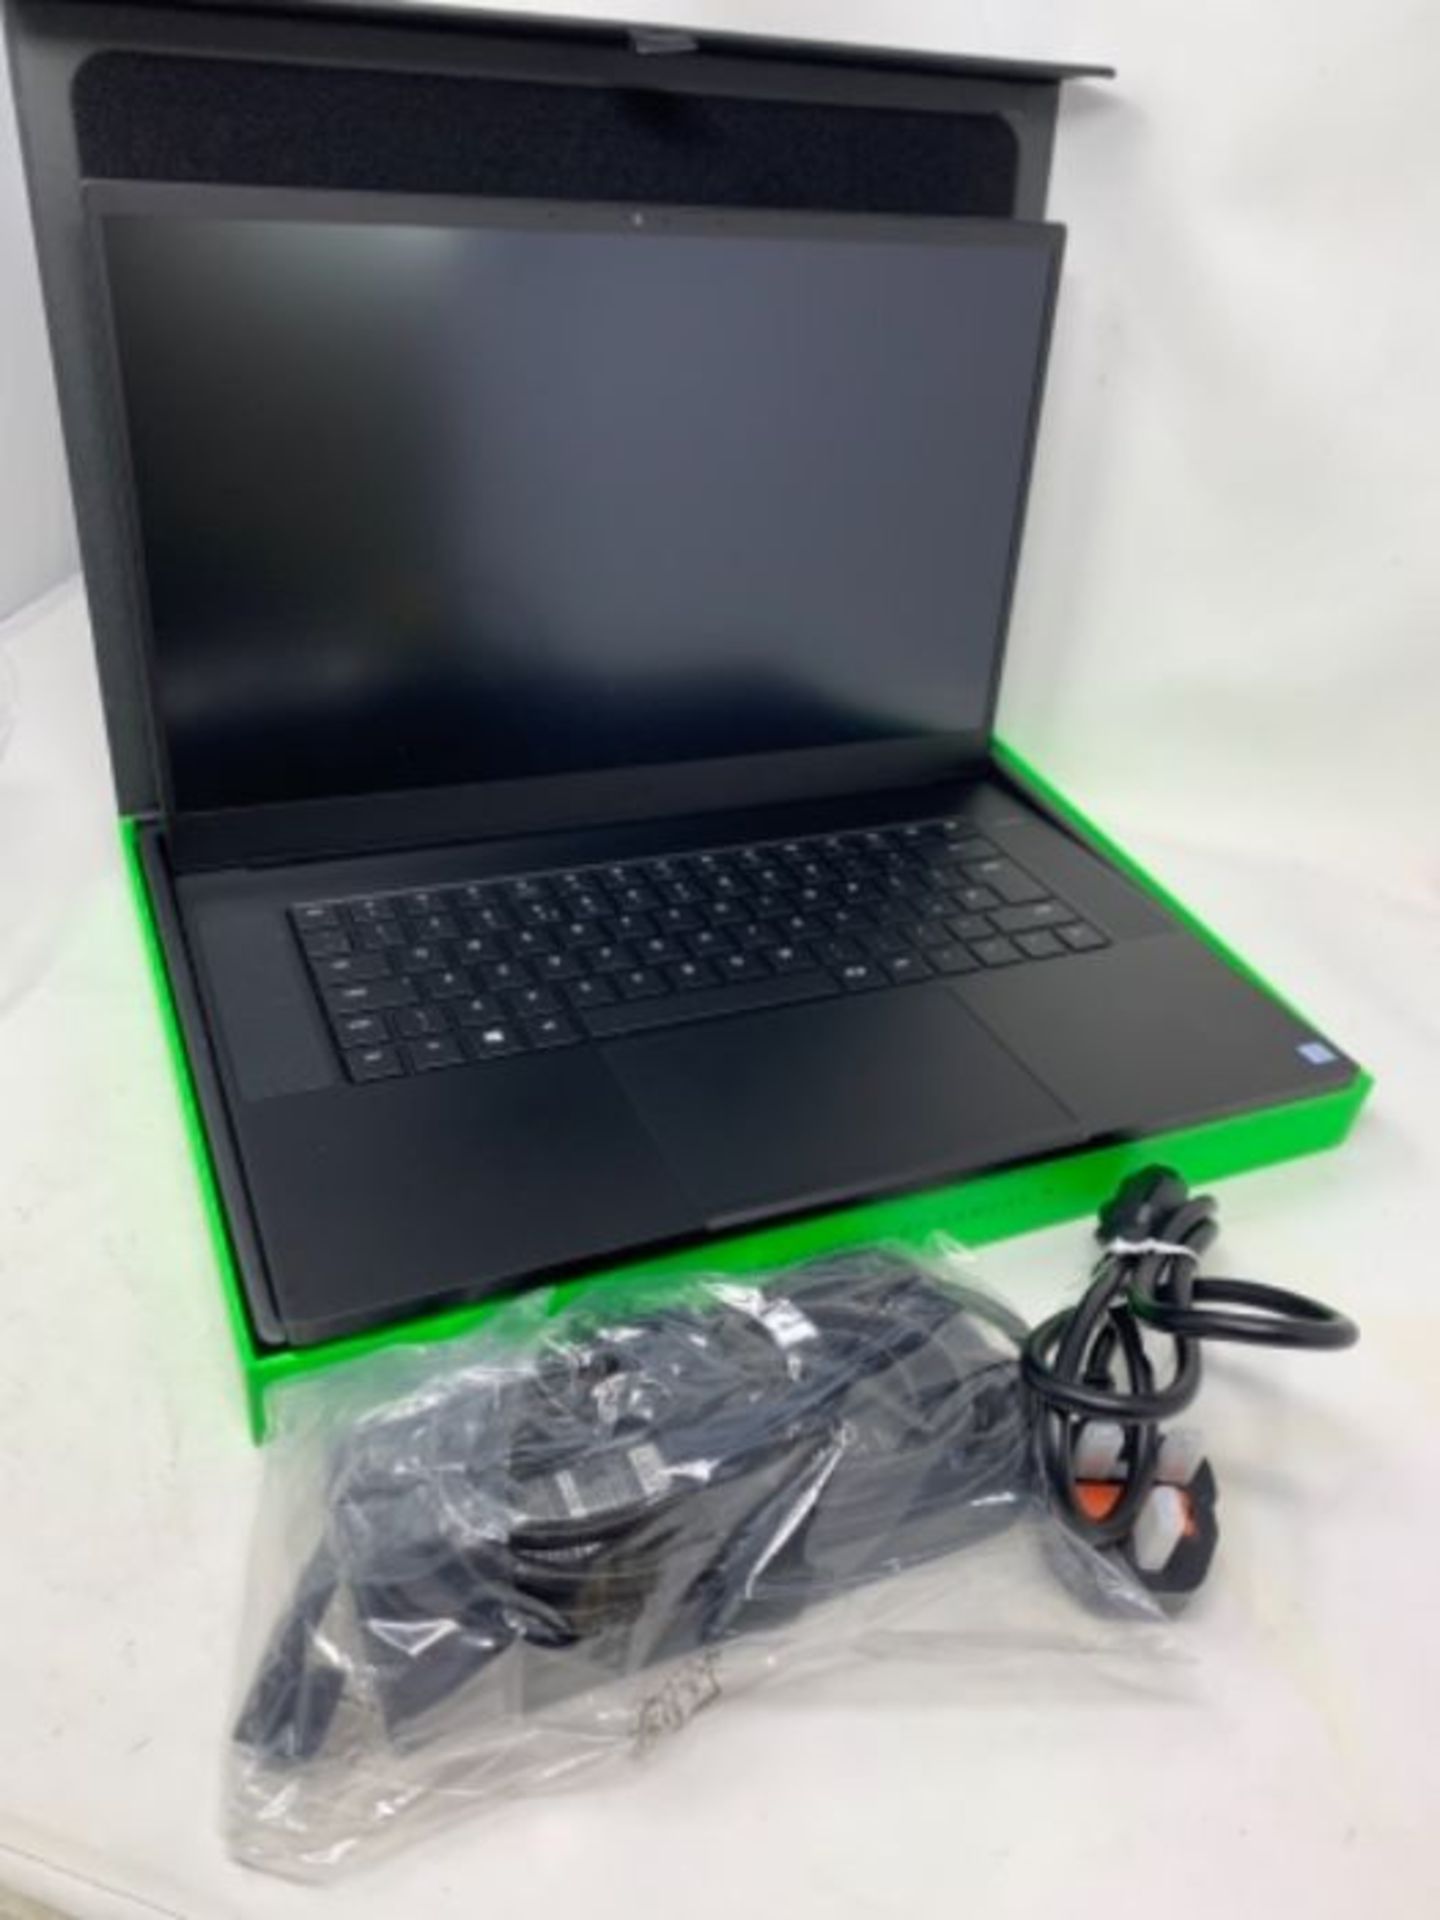 RRP £2359.00 AS NEW - Razer Blade 15 Advanced Model 2019 (15.6 Inch Full-HD Display) Gaming Noteboo - Image 2 of 3